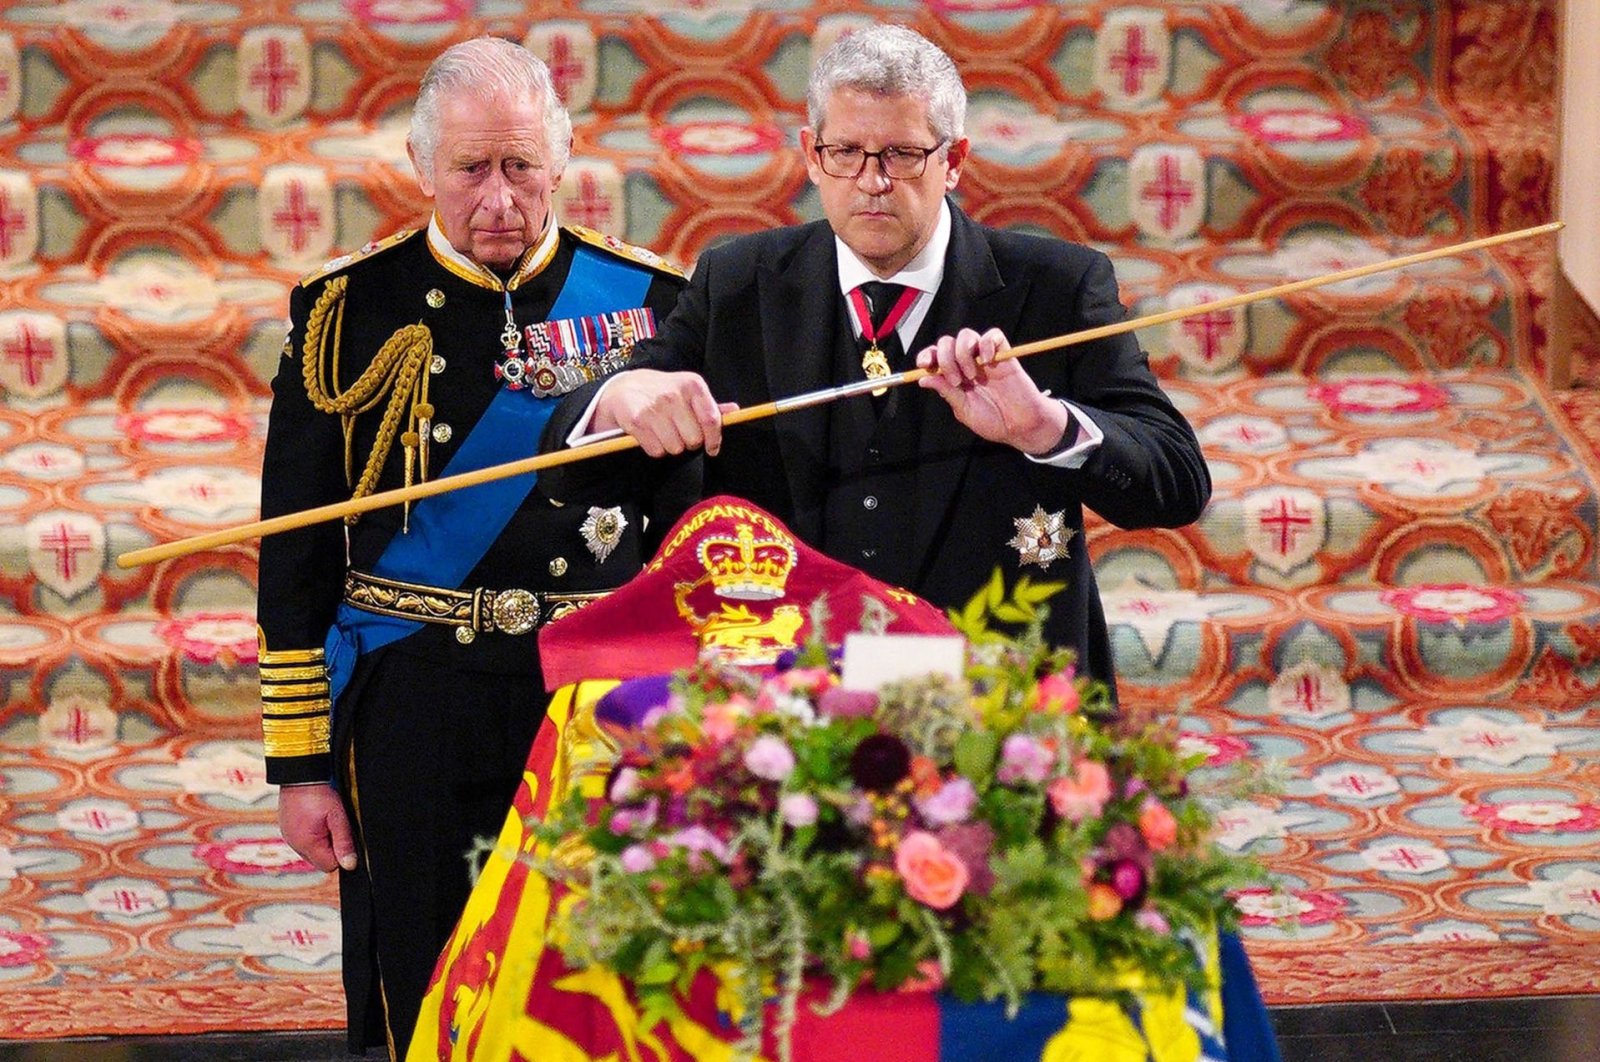 King Charles III (L) watches as Lord Chamberlain breaks his &quot;Wand of Office&quot; at the Committal Service for Queen Elizabeth II held at St George&#039;s Chapel in Windsor Castle, U.K., Sept. 19, 2022. (AFP Photo)